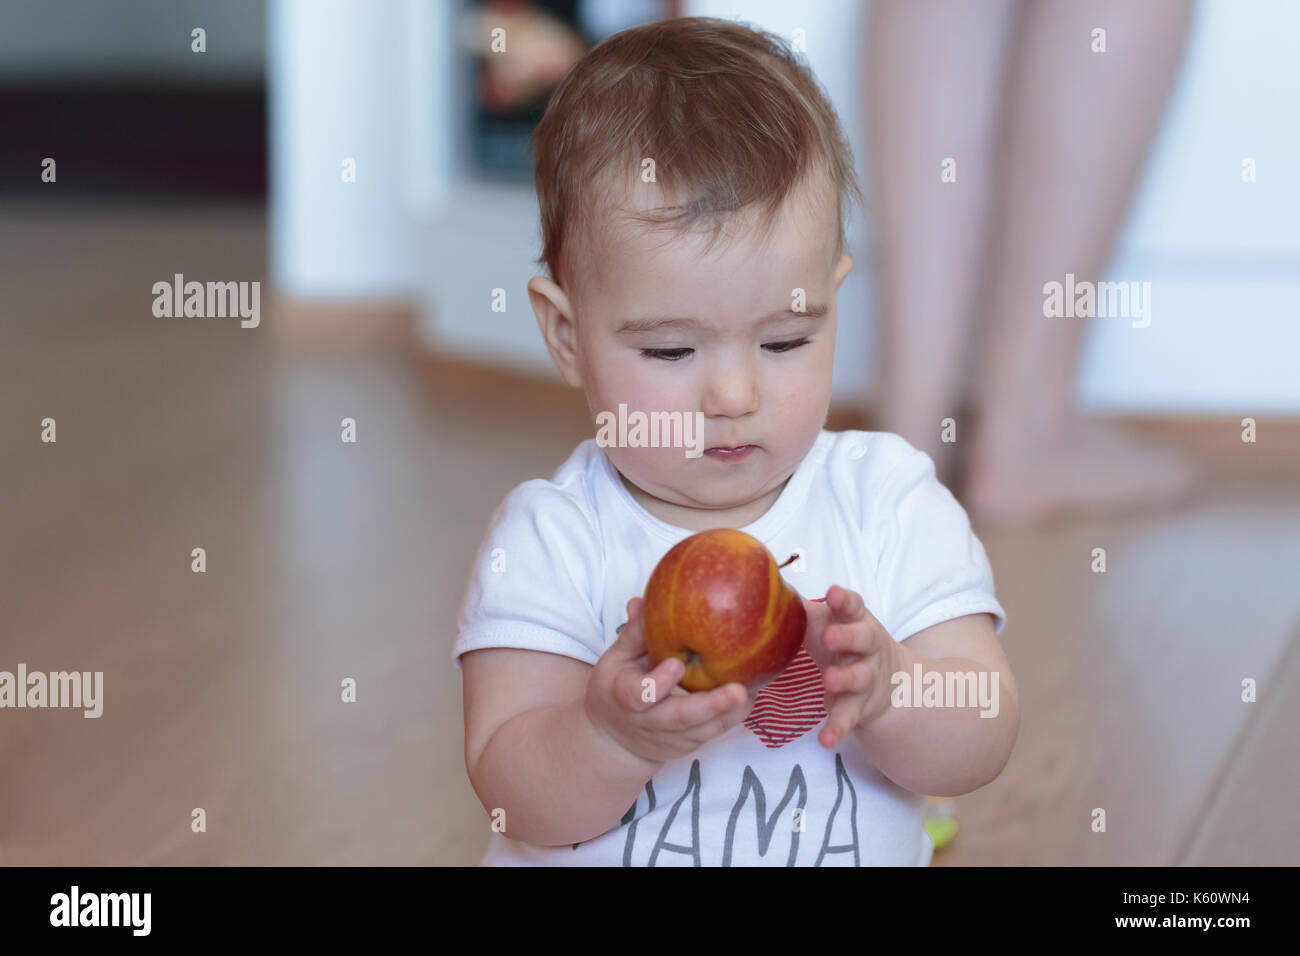 Little child with a red apple in his hands. Stock Photo